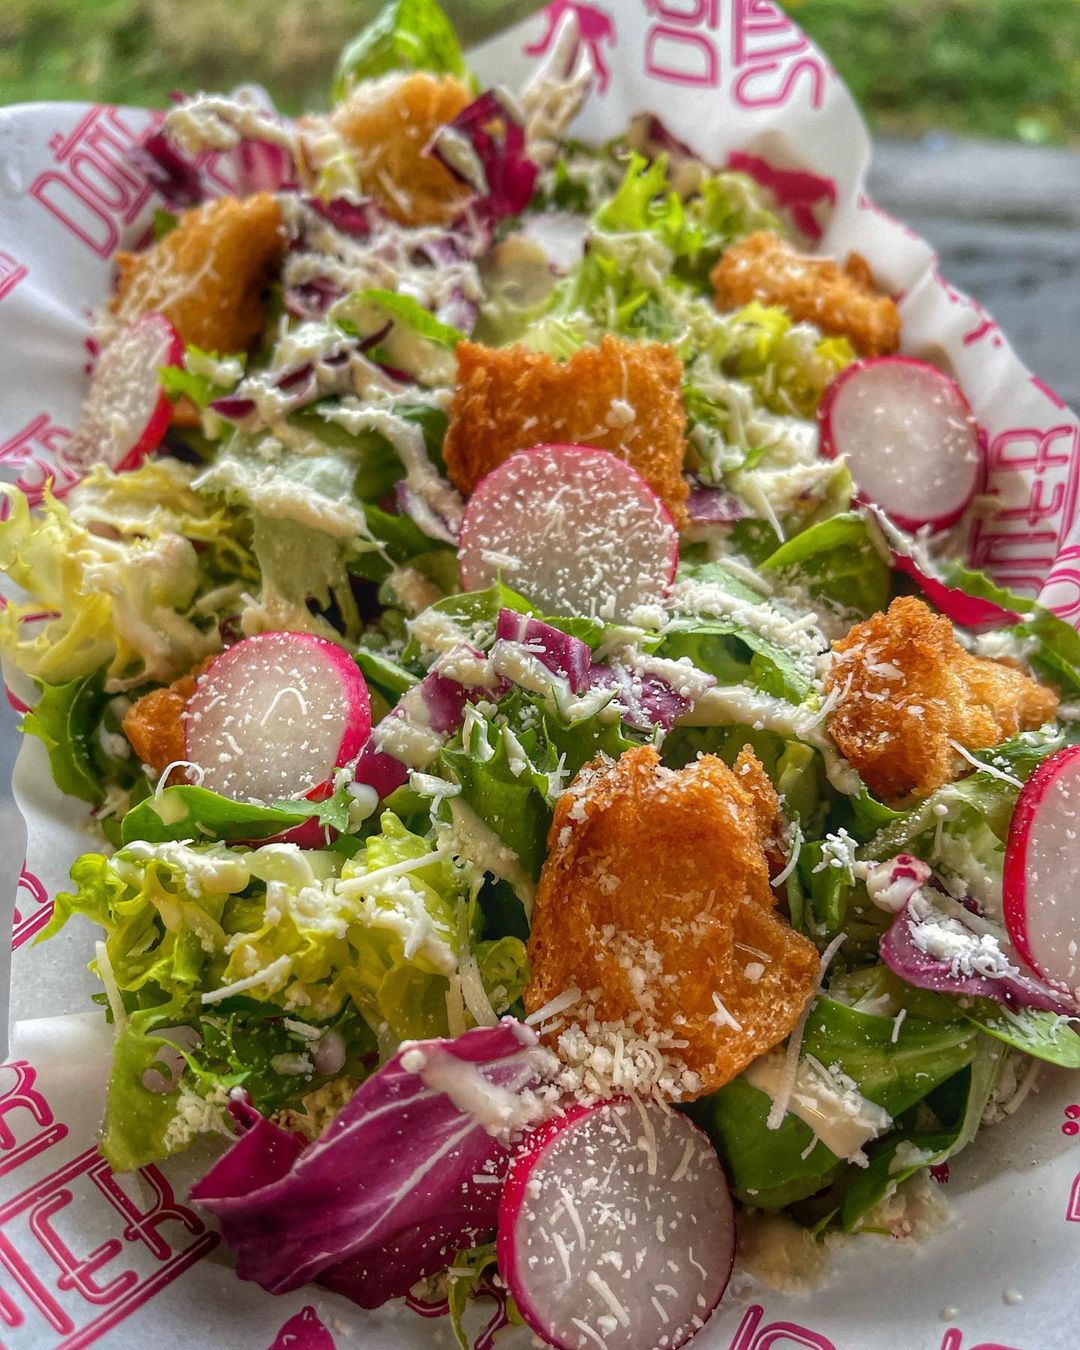 vegan haus salad launched in time for world vegan day at junk food restaurant in Leeds